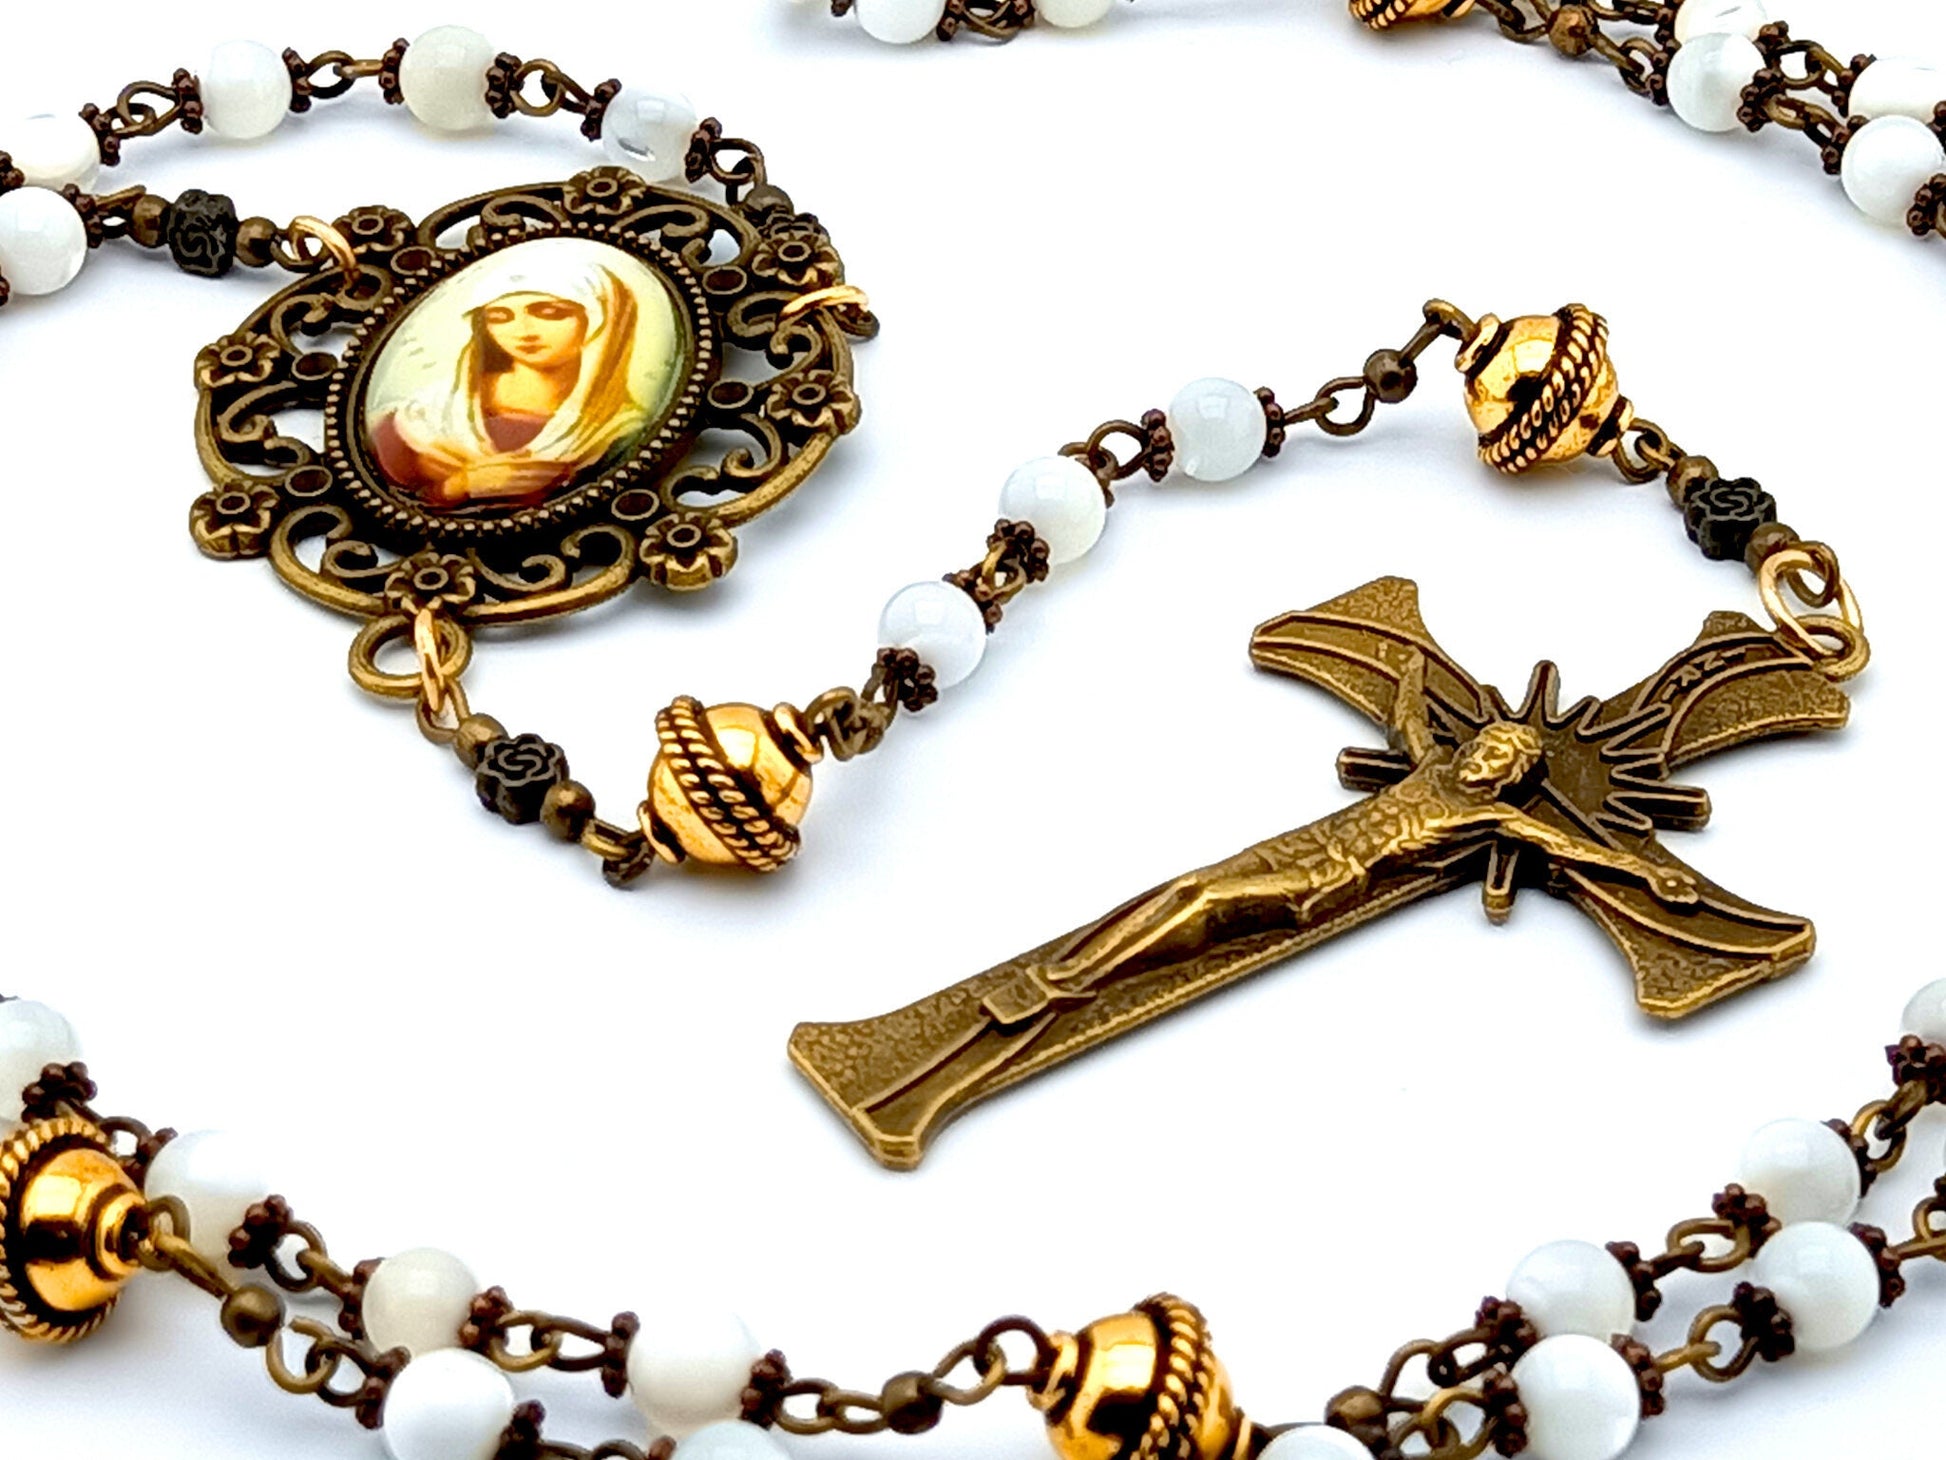 Our Lady of Twelve Stars unique rosary beads with mother of pearl and golden beads, bronze crucifix and picture centre medal.